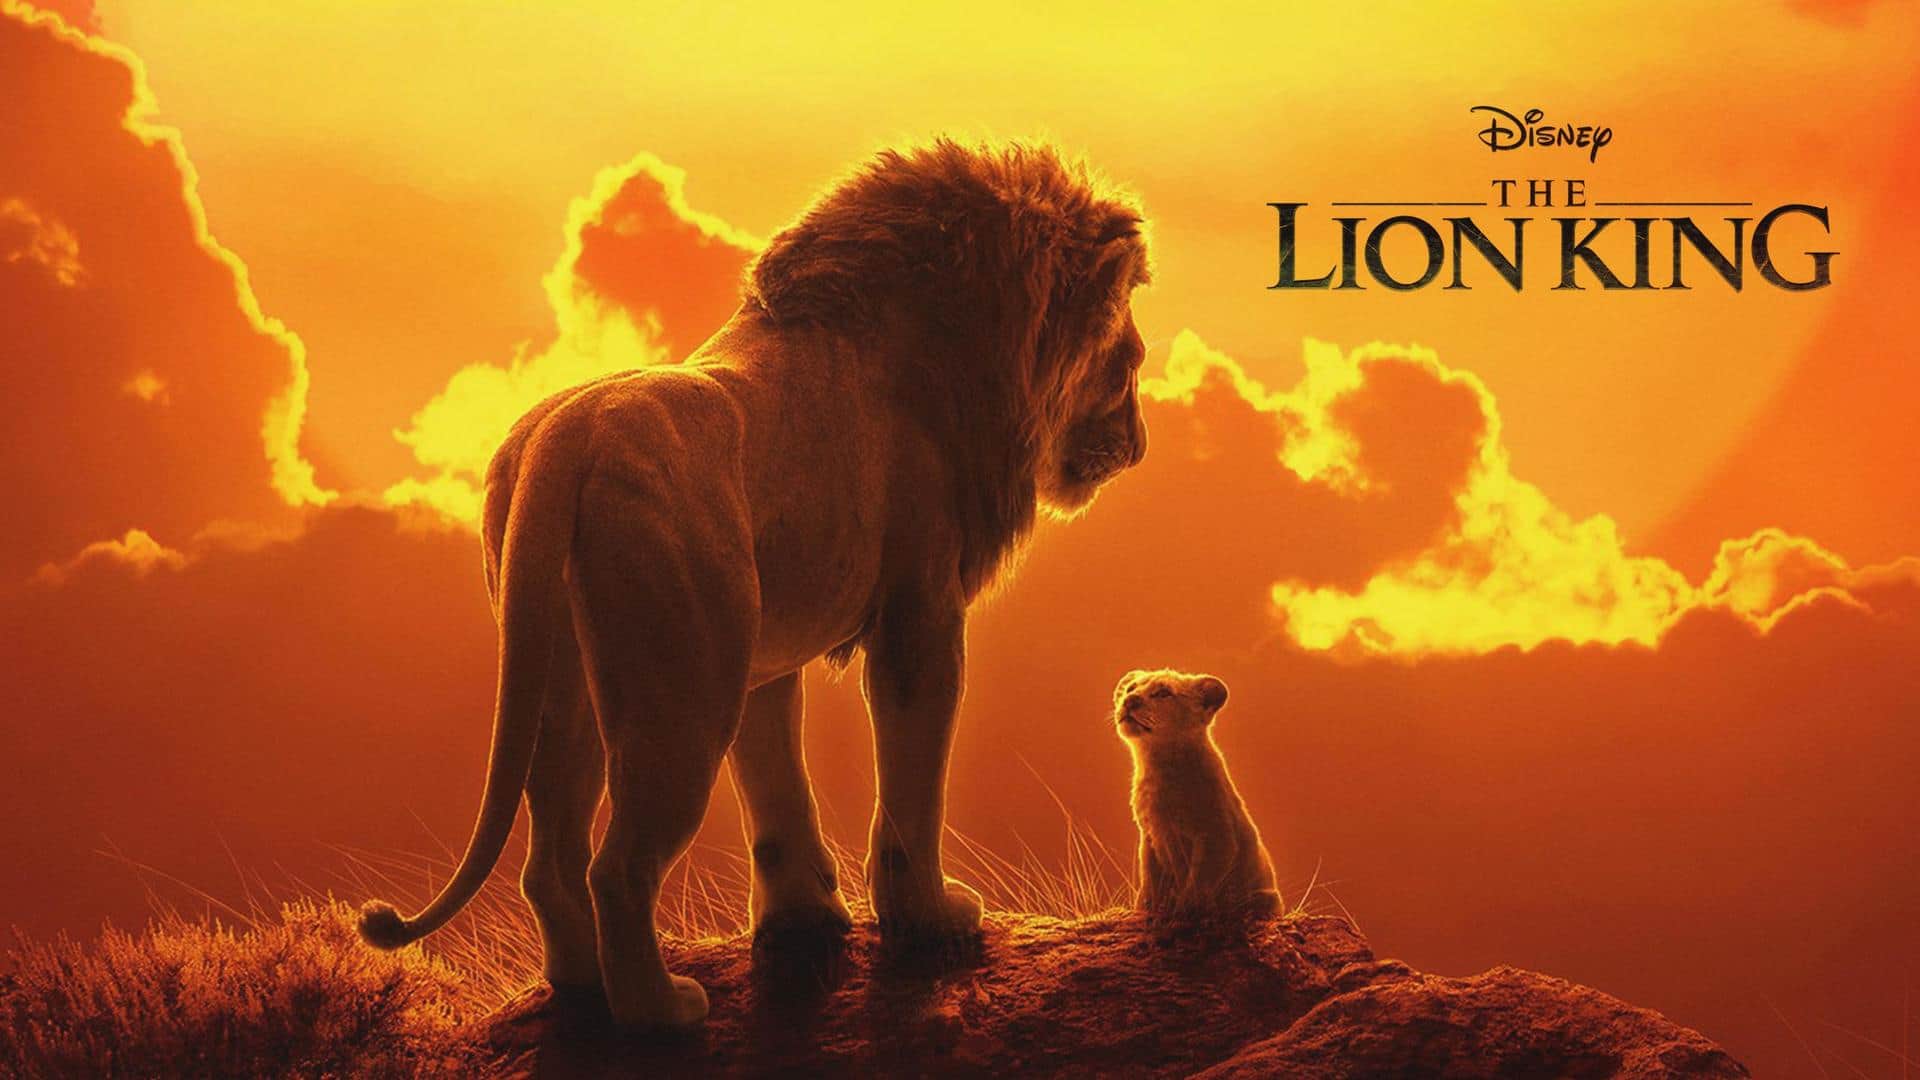 #FourYearsOfTheLionKing: Reflecting on 5 timeless lessons from Disney's film